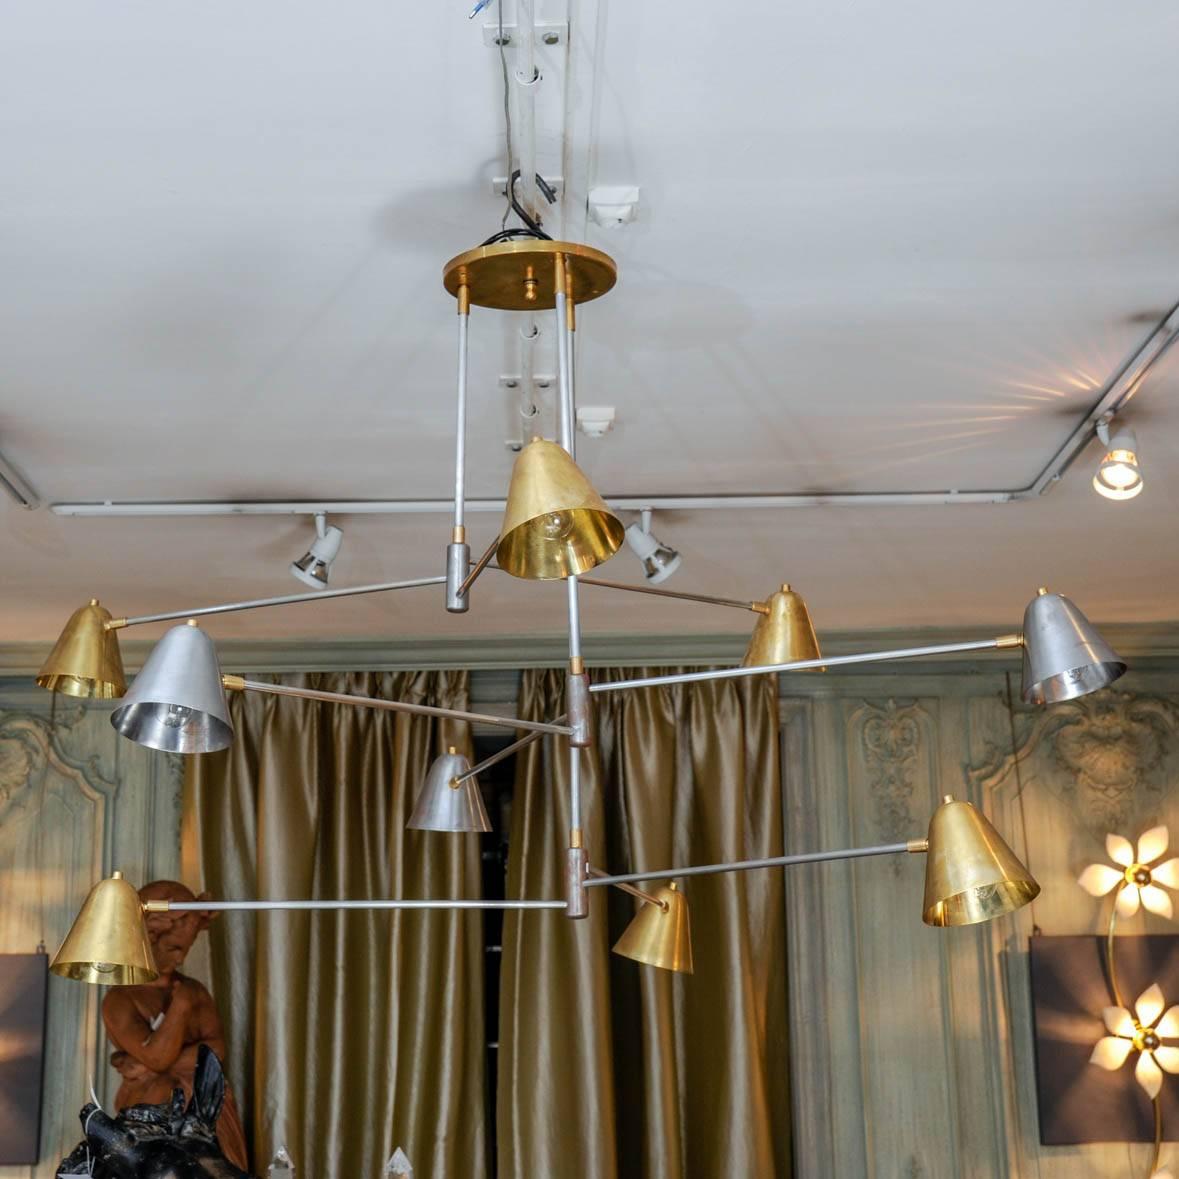 This chandelier is a creation of the Studio Glustin. It is made of brass and steel, and composed by nine lights with rotative metal lampshades.